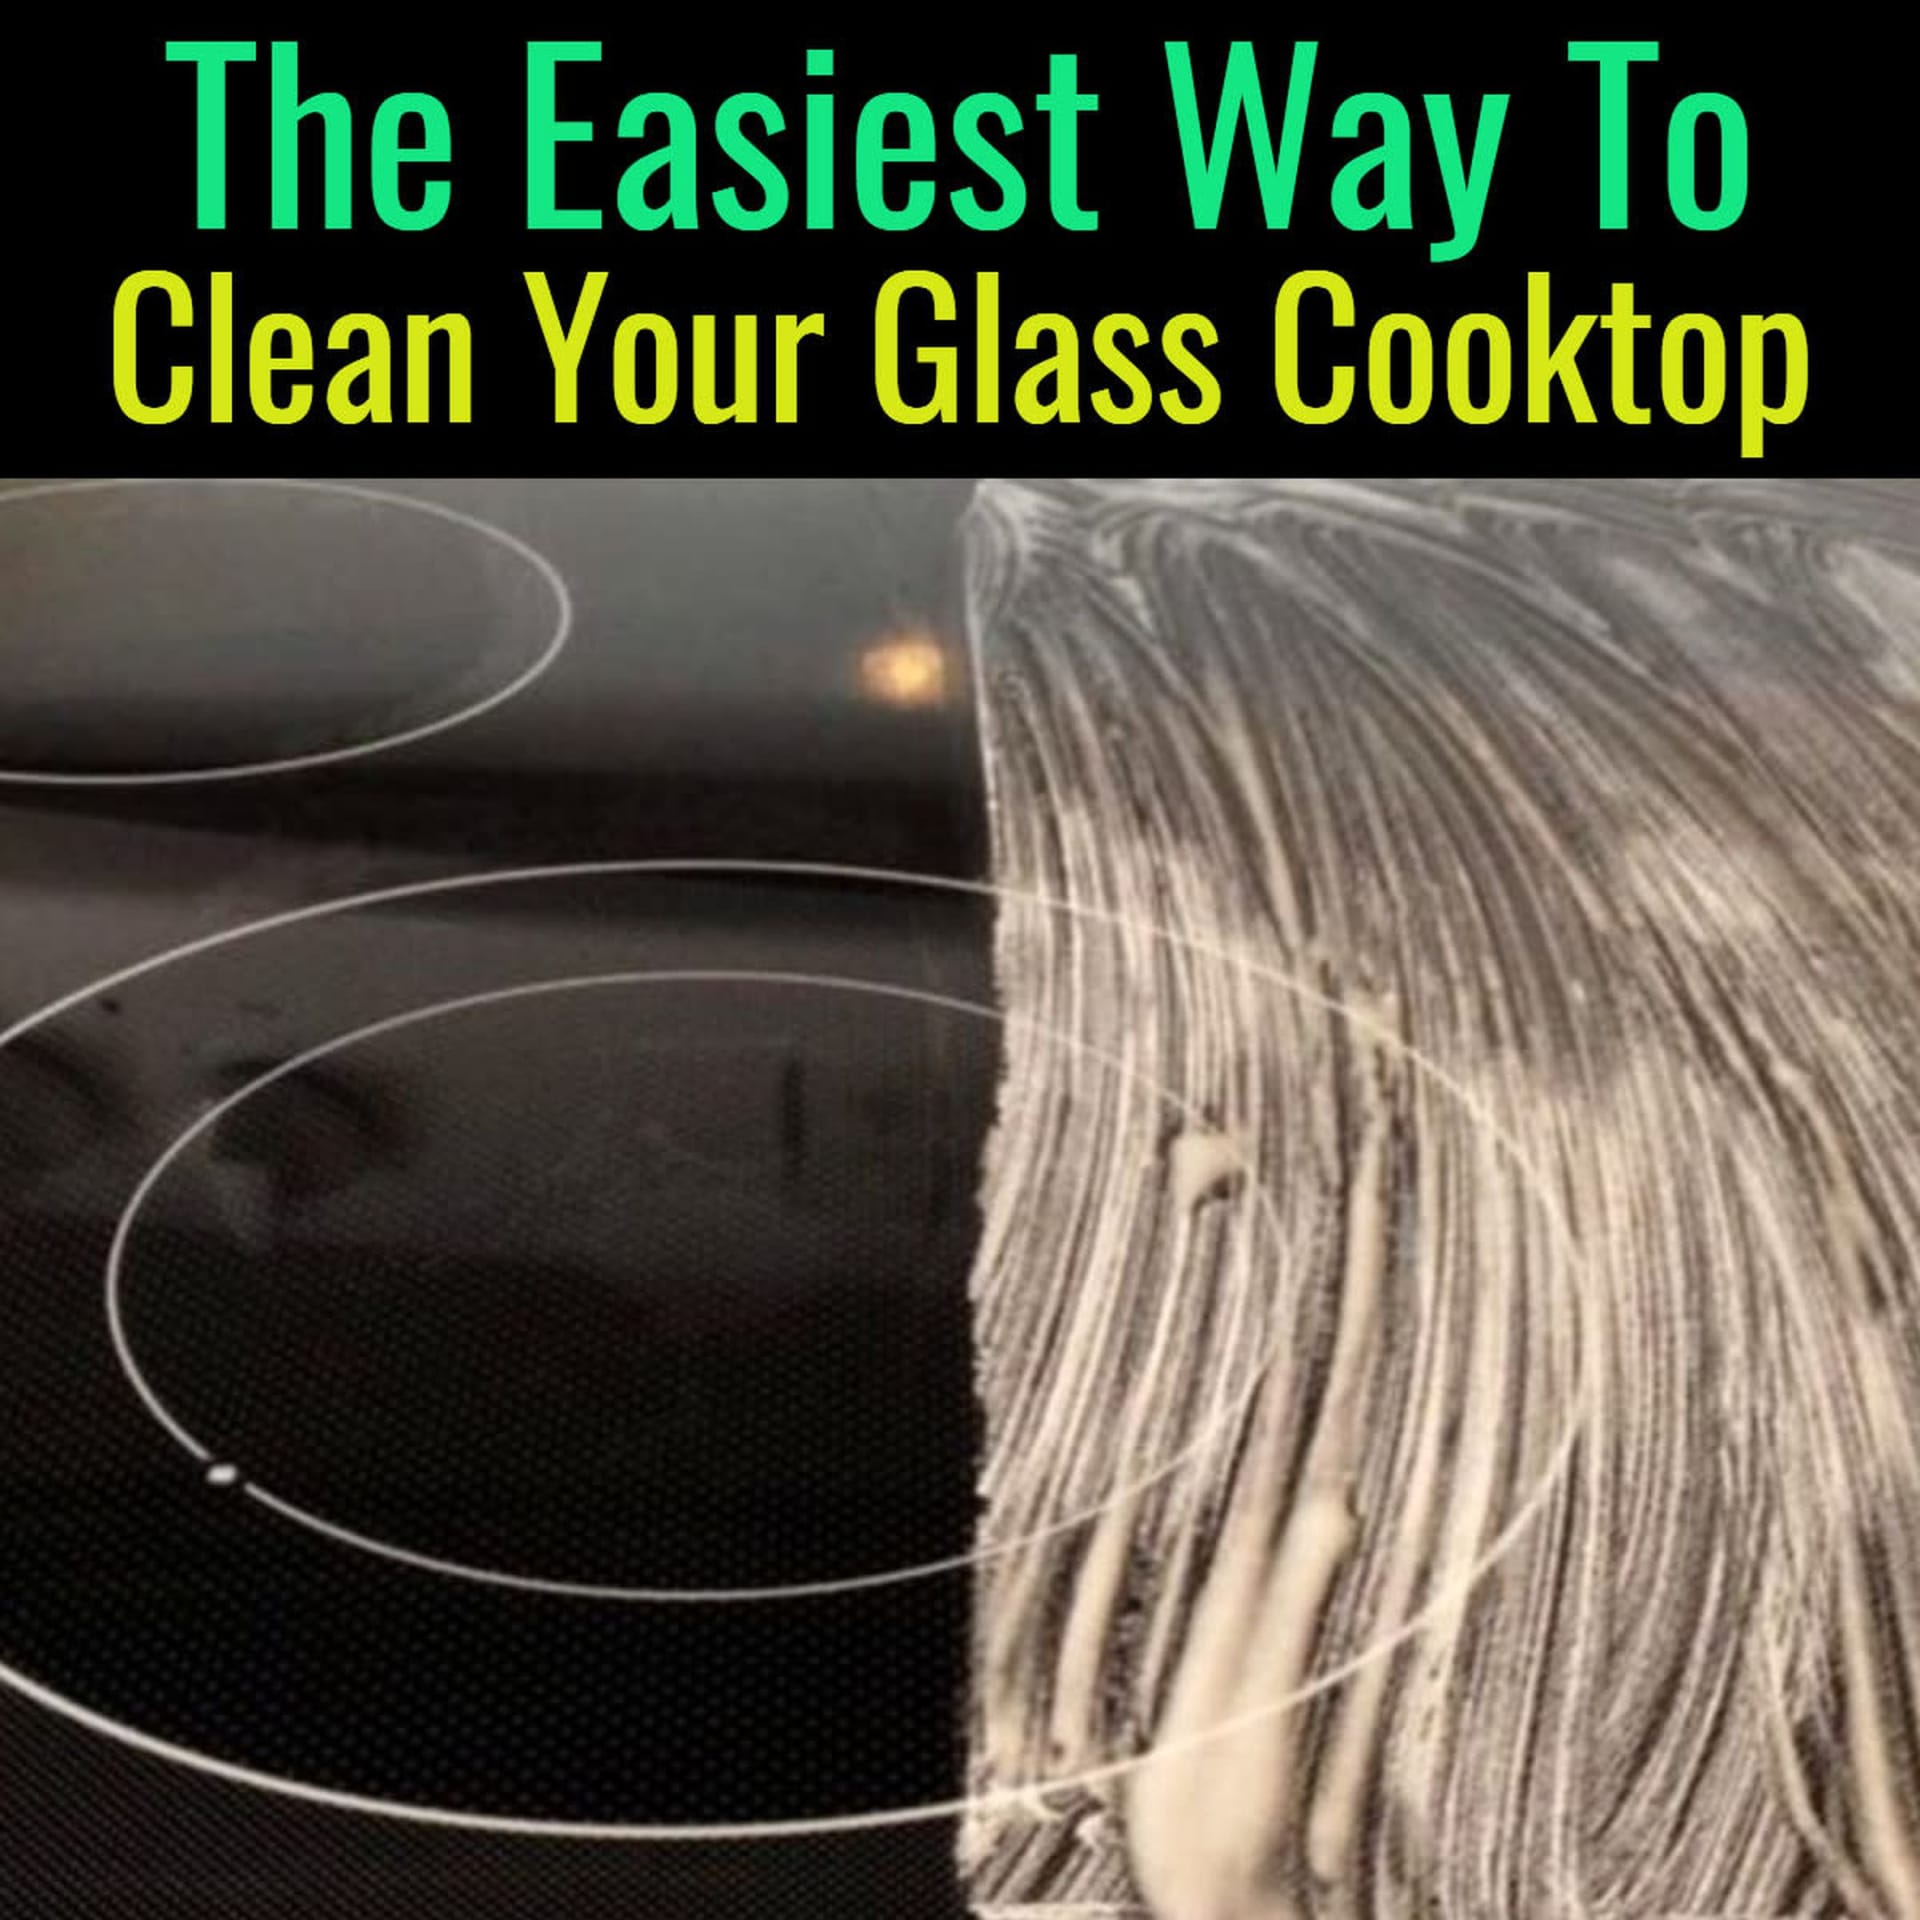 How To Clean Black Glasstop On Your Stove With 3 Common Household Items